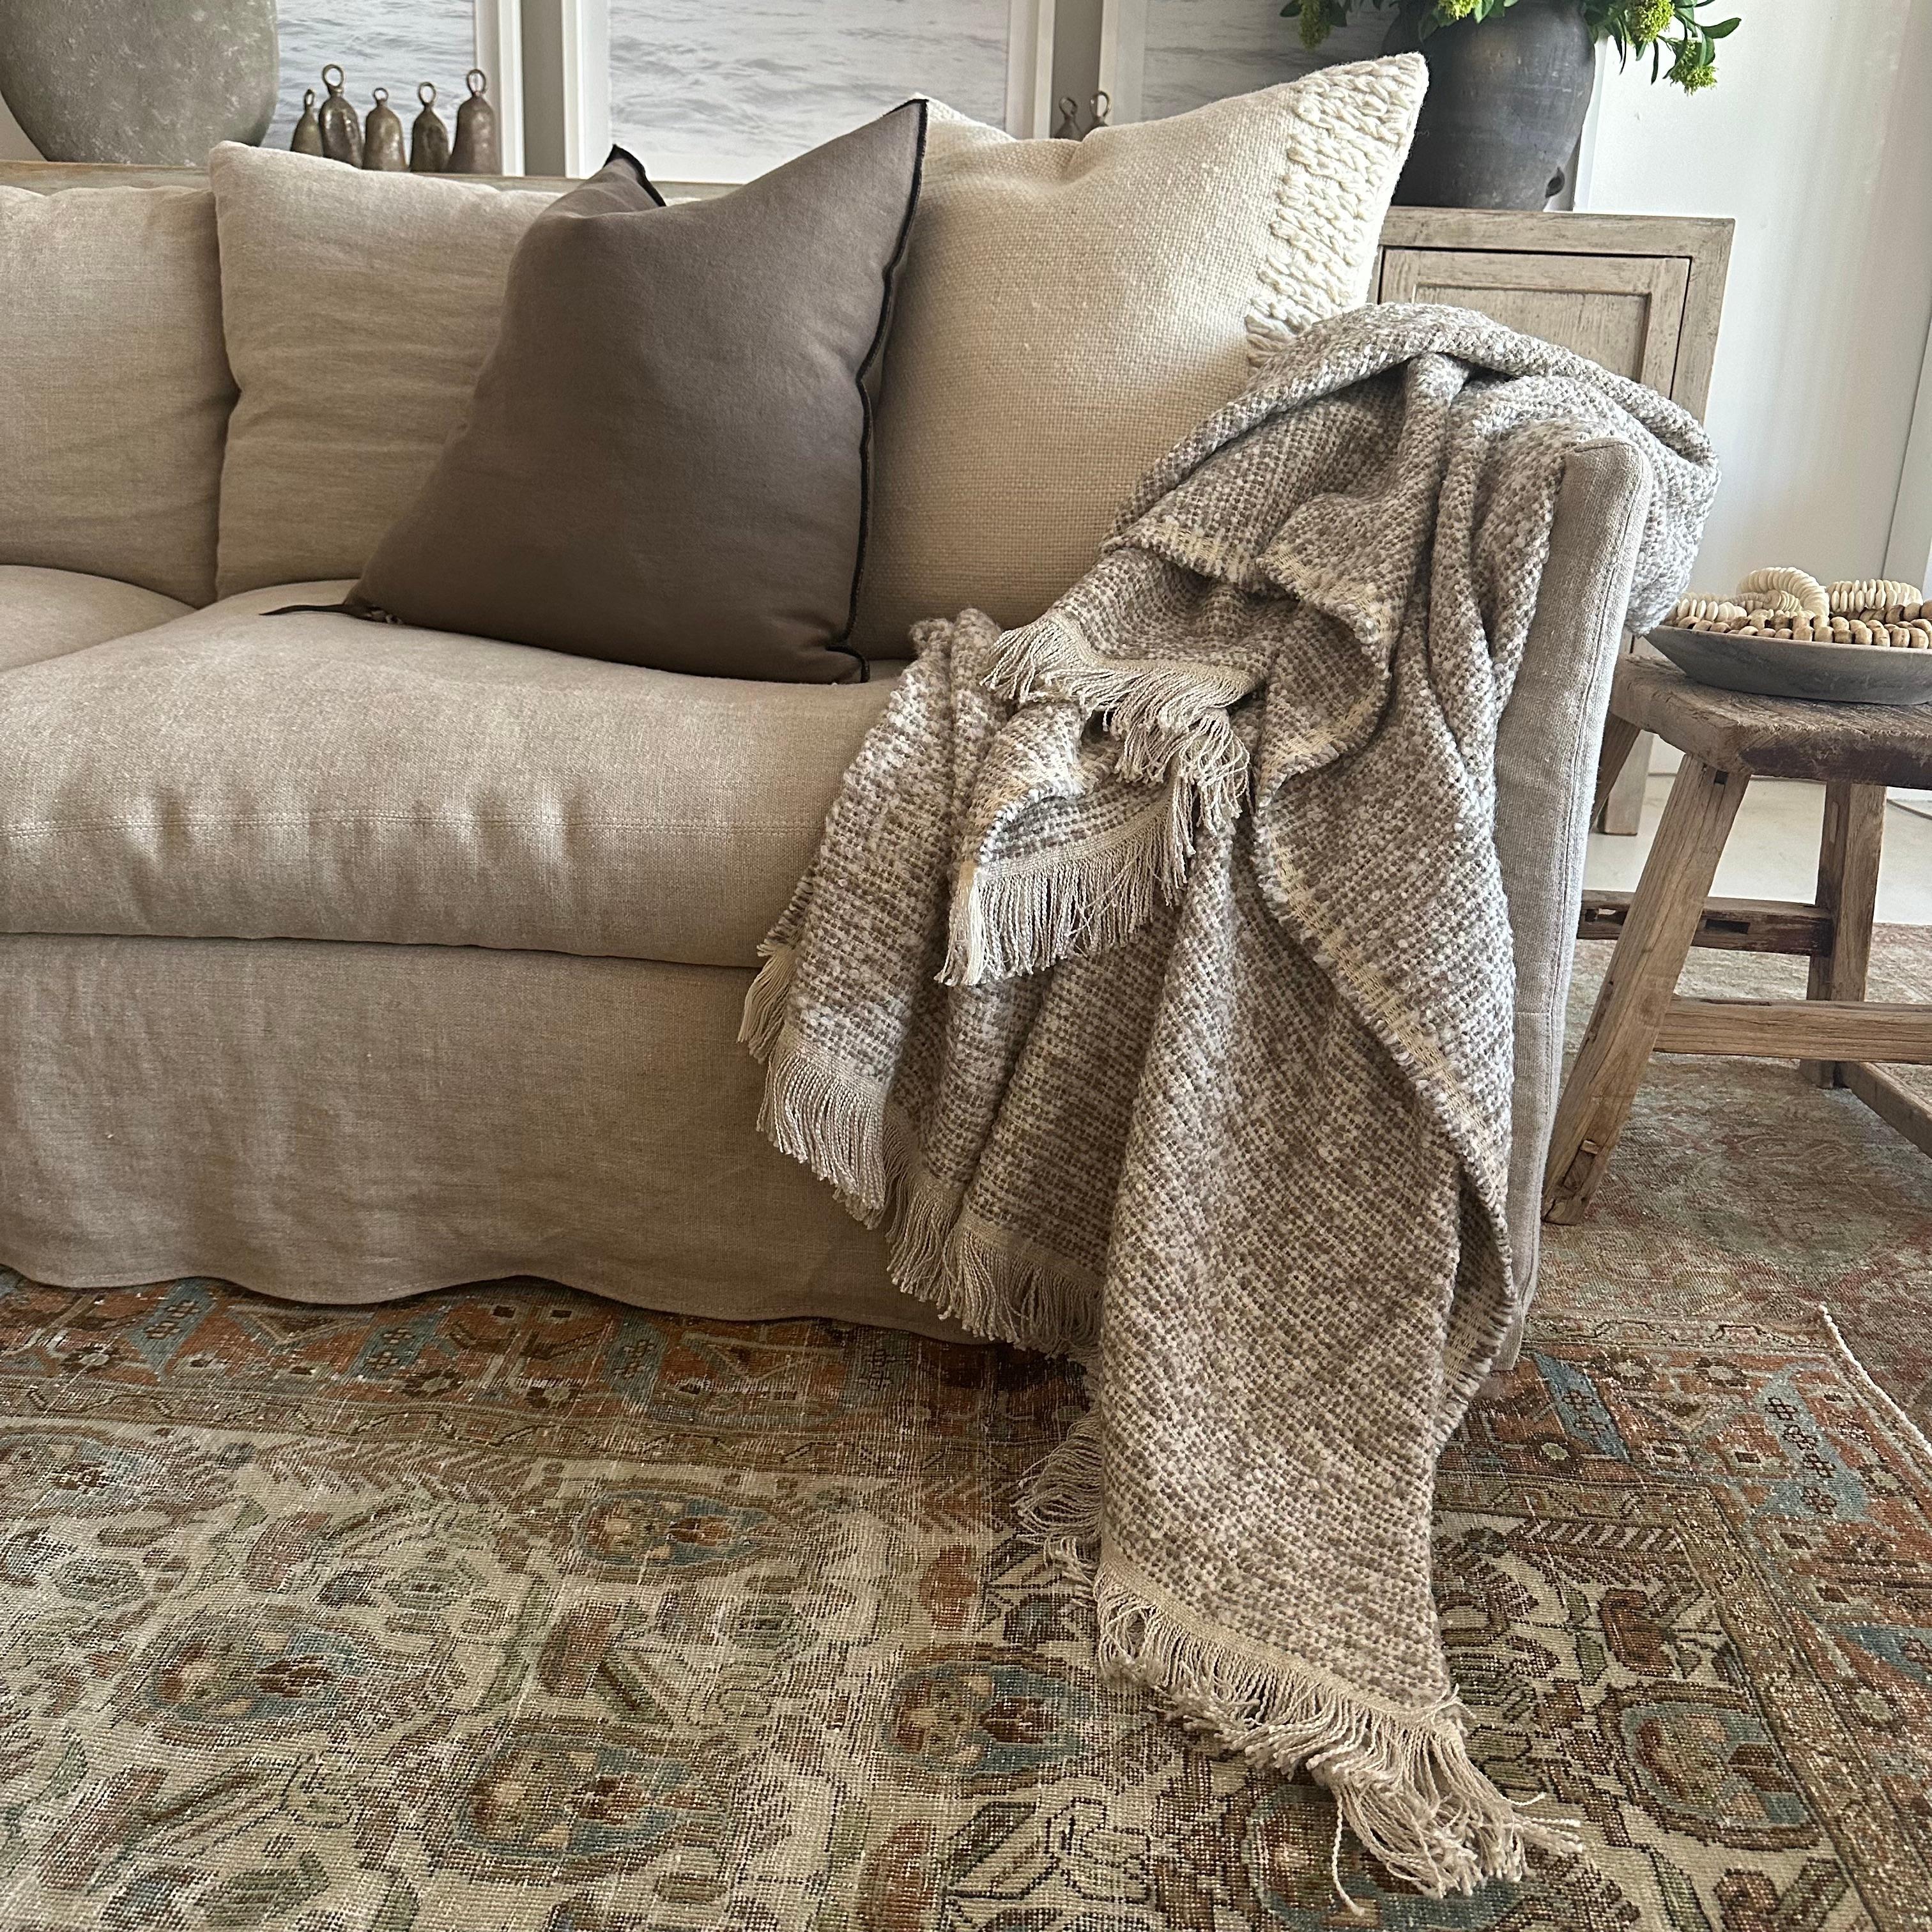 Woven in Belgium using traditional weaving techniques, Bloom Home Inc throw features a combination of smooth Belgian Linen and woolly Alpaca. This blanket combines a fluffy boucle wool with a silky soft viscose/linen.

Color: Natural & Mink
Content: